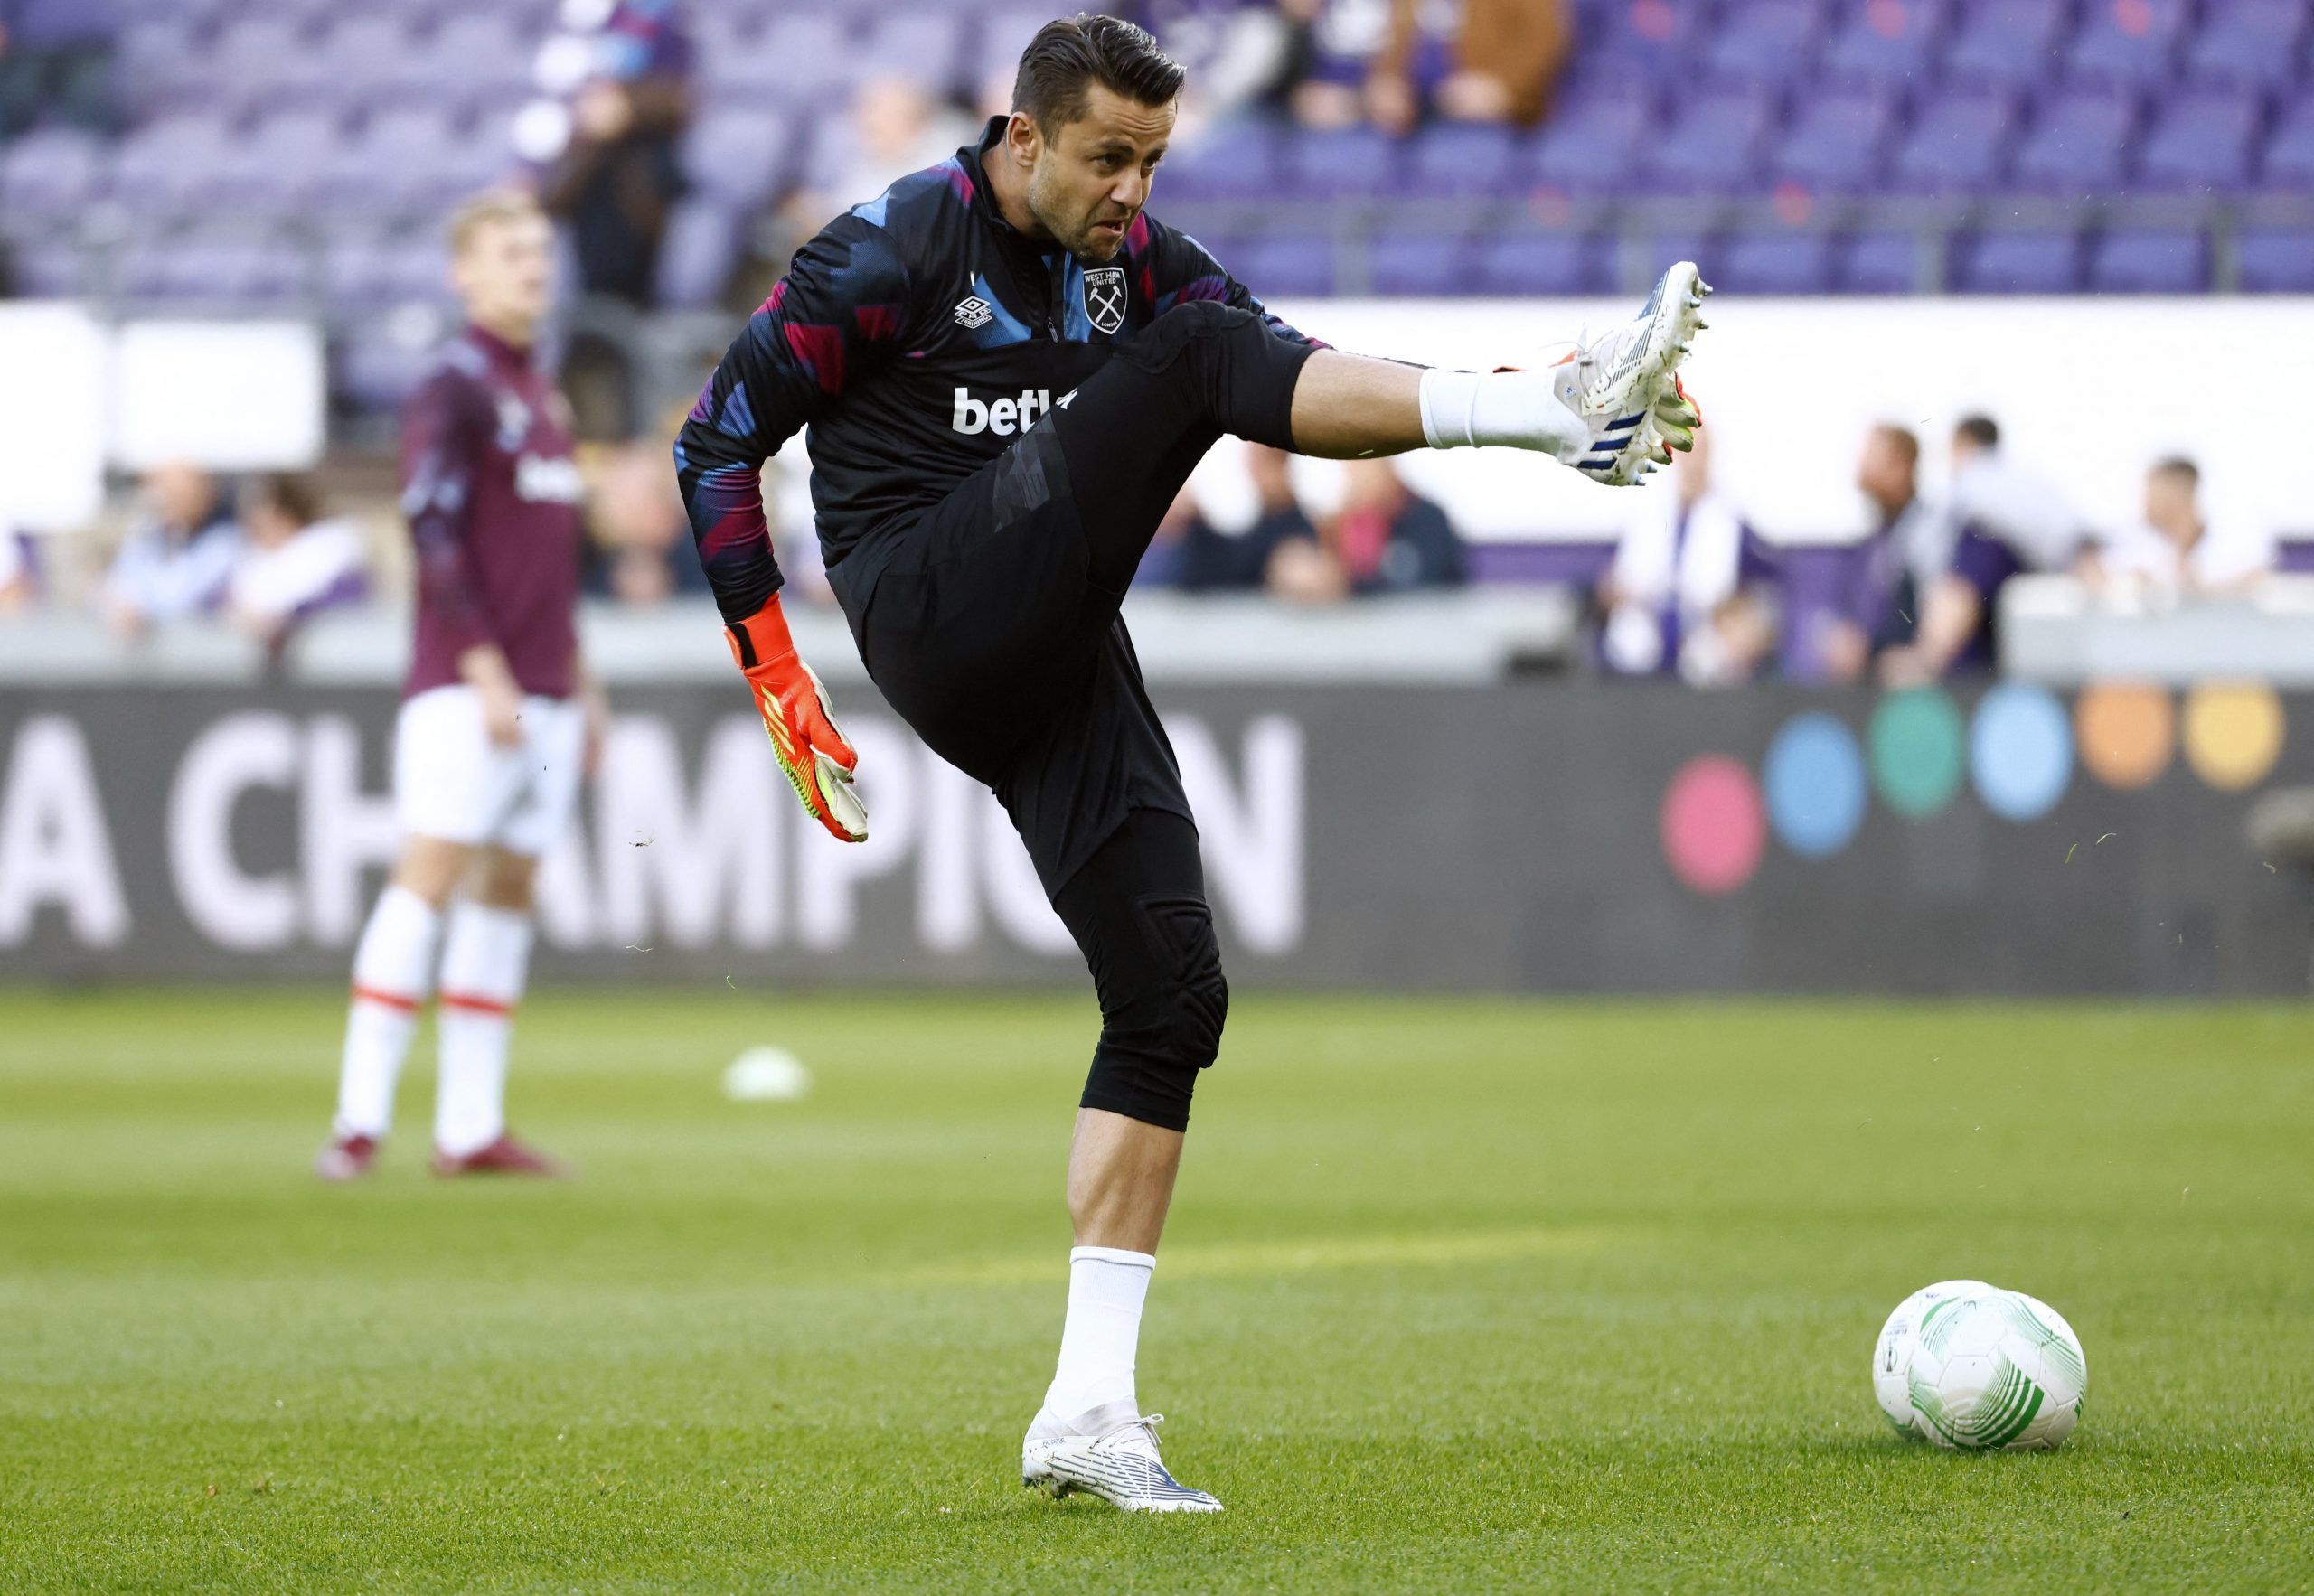 Soccer Football - Europa Conference League - Group B - Anderlecht v West Ham United - Lotto Park, Anderlecht, Belgium - October 6, 2022  West Ham United's Lukasz Fabianski during the warm up before the match REUTERS/Yves Herman